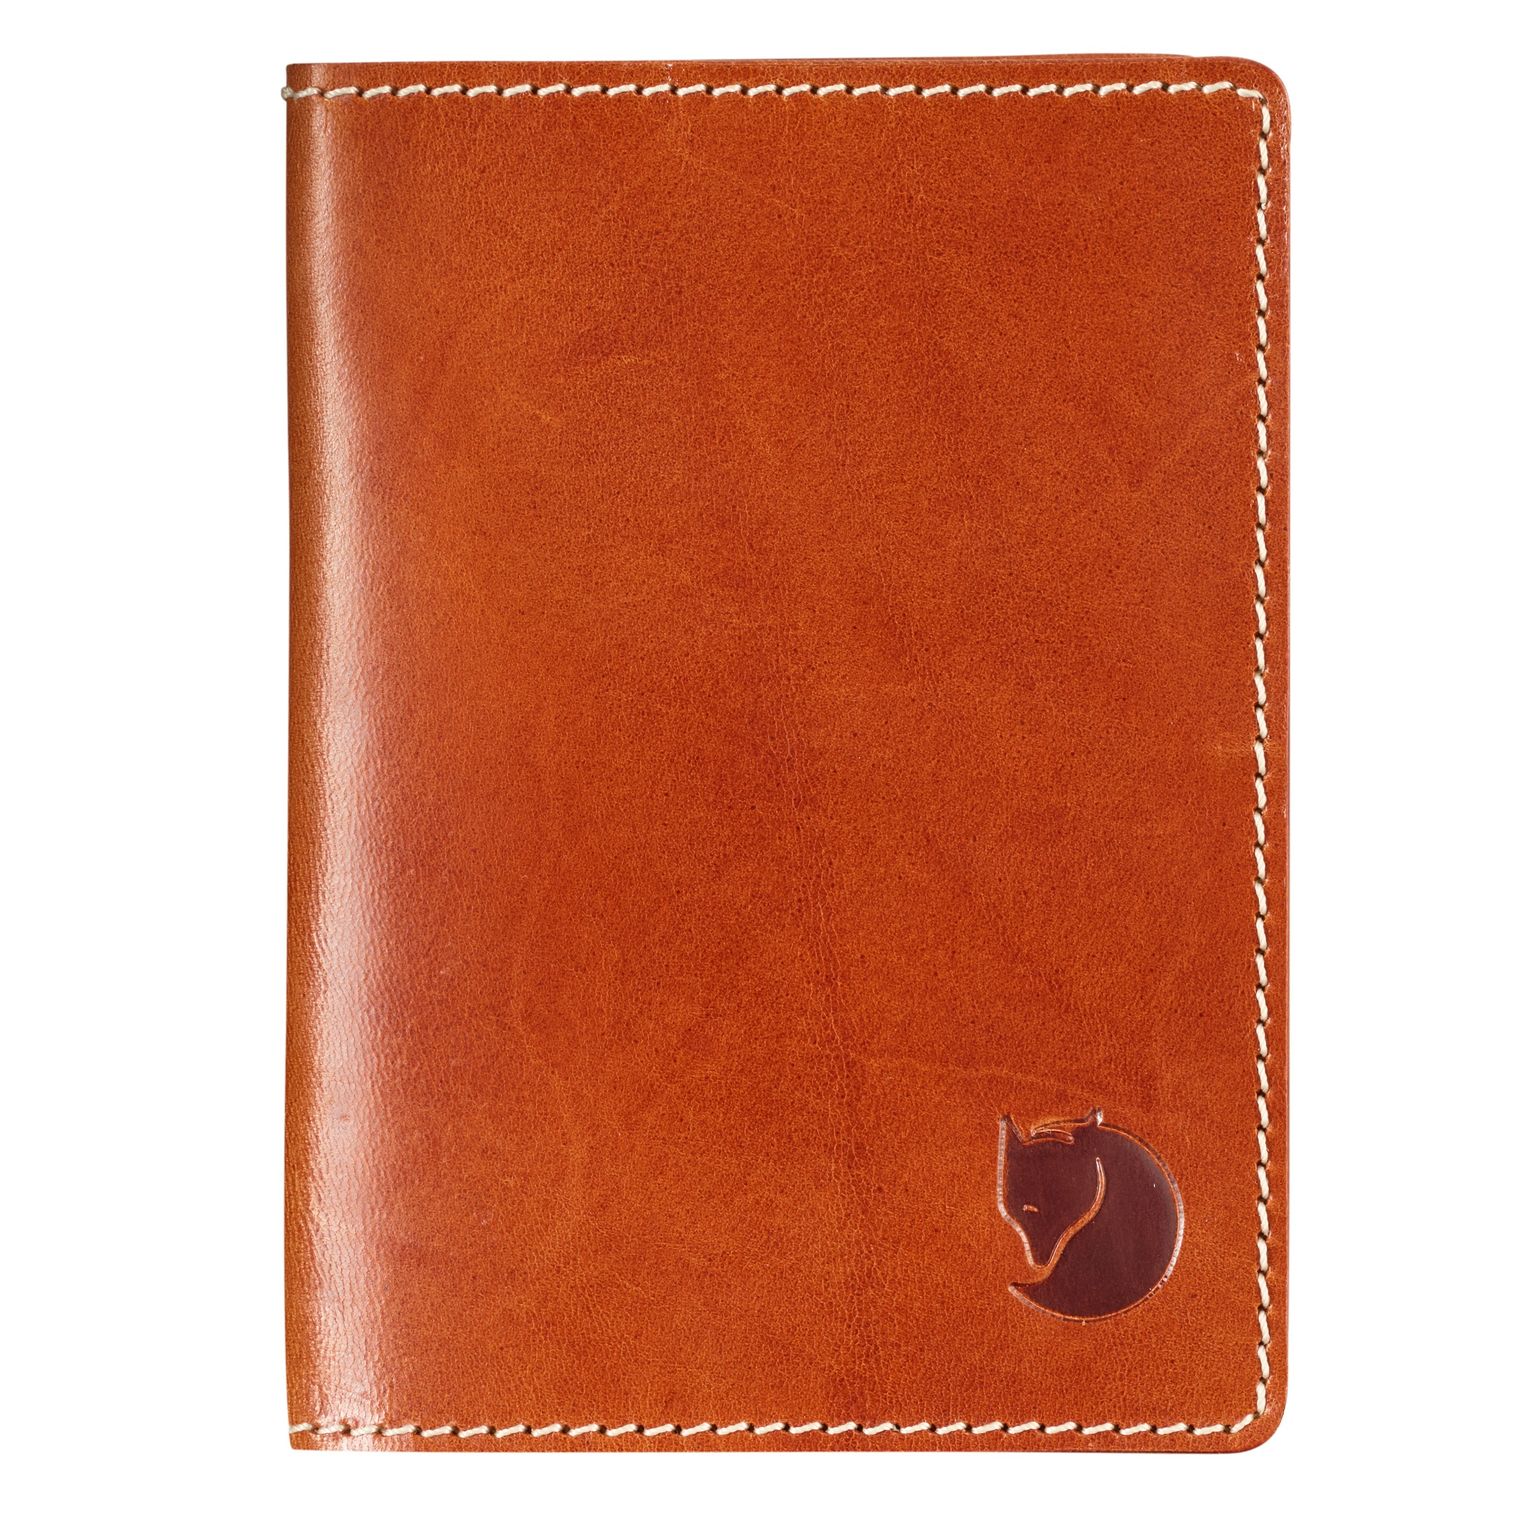 Leather Passport Cover Leather Cognac